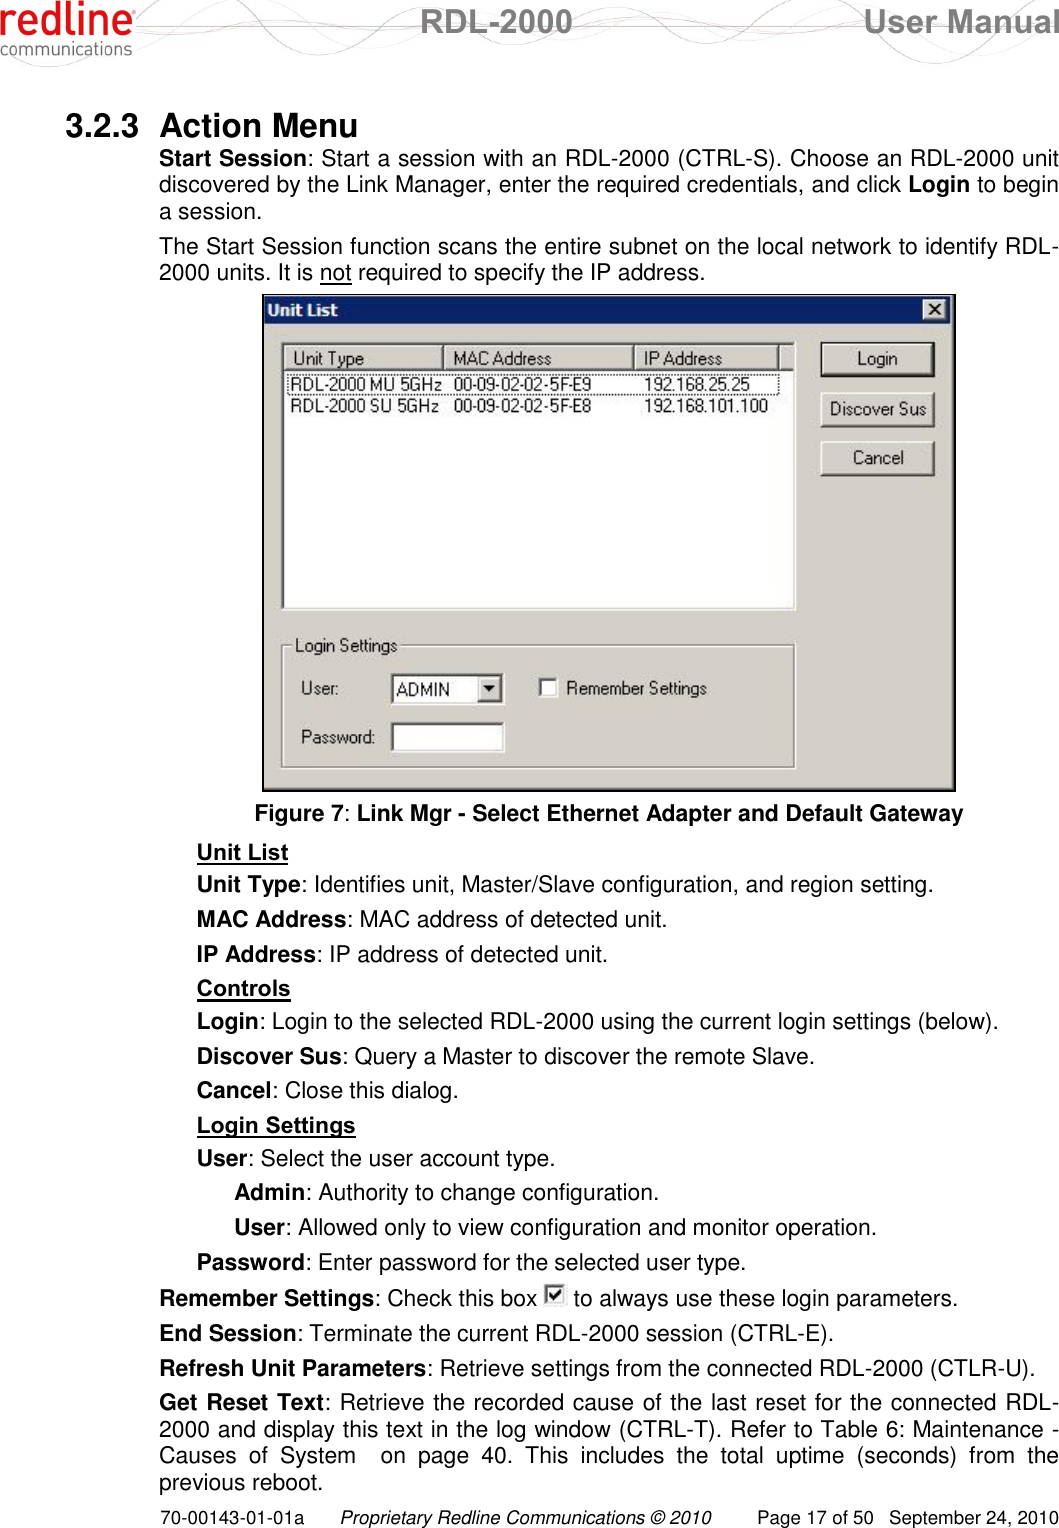  RDL-2000  User Manual 70-00143-01-01a Proprietary Redline Communications © 2010  Page 17 of 50  September 24, 2010 3.2.3  Action Menu Start Session: Start a session with an RDL-2000 (CTRL-S). Choose an RDL-2000 unit discovered by the Link Manager, enter the required credentials, and click Login to begin a session. The Start Session function scans the entire subnet on the local network to identify RDL-2000 units. It is not required to specify the IP address.  Figure 7: Link Mgr - Select Ethernet Adapter and Default Gateway Unit List Unit Type: Identifies unit, Master/Slave configuration, and region setting. MAC Address: MAC address of detected unit. IP Address: IP address of detected unit. Controls Login: Login to the selected RDL-2000 using the current login settings (below). Discover Sus: Query a Master to discover the remote Slave. Cancel: Close this dialog. Login Settings User: Select the user account type.  Admin: Authority to change configuration.  User: Allowed only to view configuration and monitor operation. Password: Enter password for the selected user type. Remember Settings: Check this box   to always use these login parameters. End Session: Terminate the current RDL-2000 session (CTRL-E). Refresh Unit Parameters: Retrieve settings from the connected RDL-2000 (CTLR-U). Get Reset Text: Retrieve the recorded cause of the last reset for the connected RDL-2000 and display this text in the log window (CTRL-T). Refer to Table 6: Maintenance - Causes  of  System    on  page  40.  This  includes  the  total  uptime  (seconds)  from  the previous reboot. 